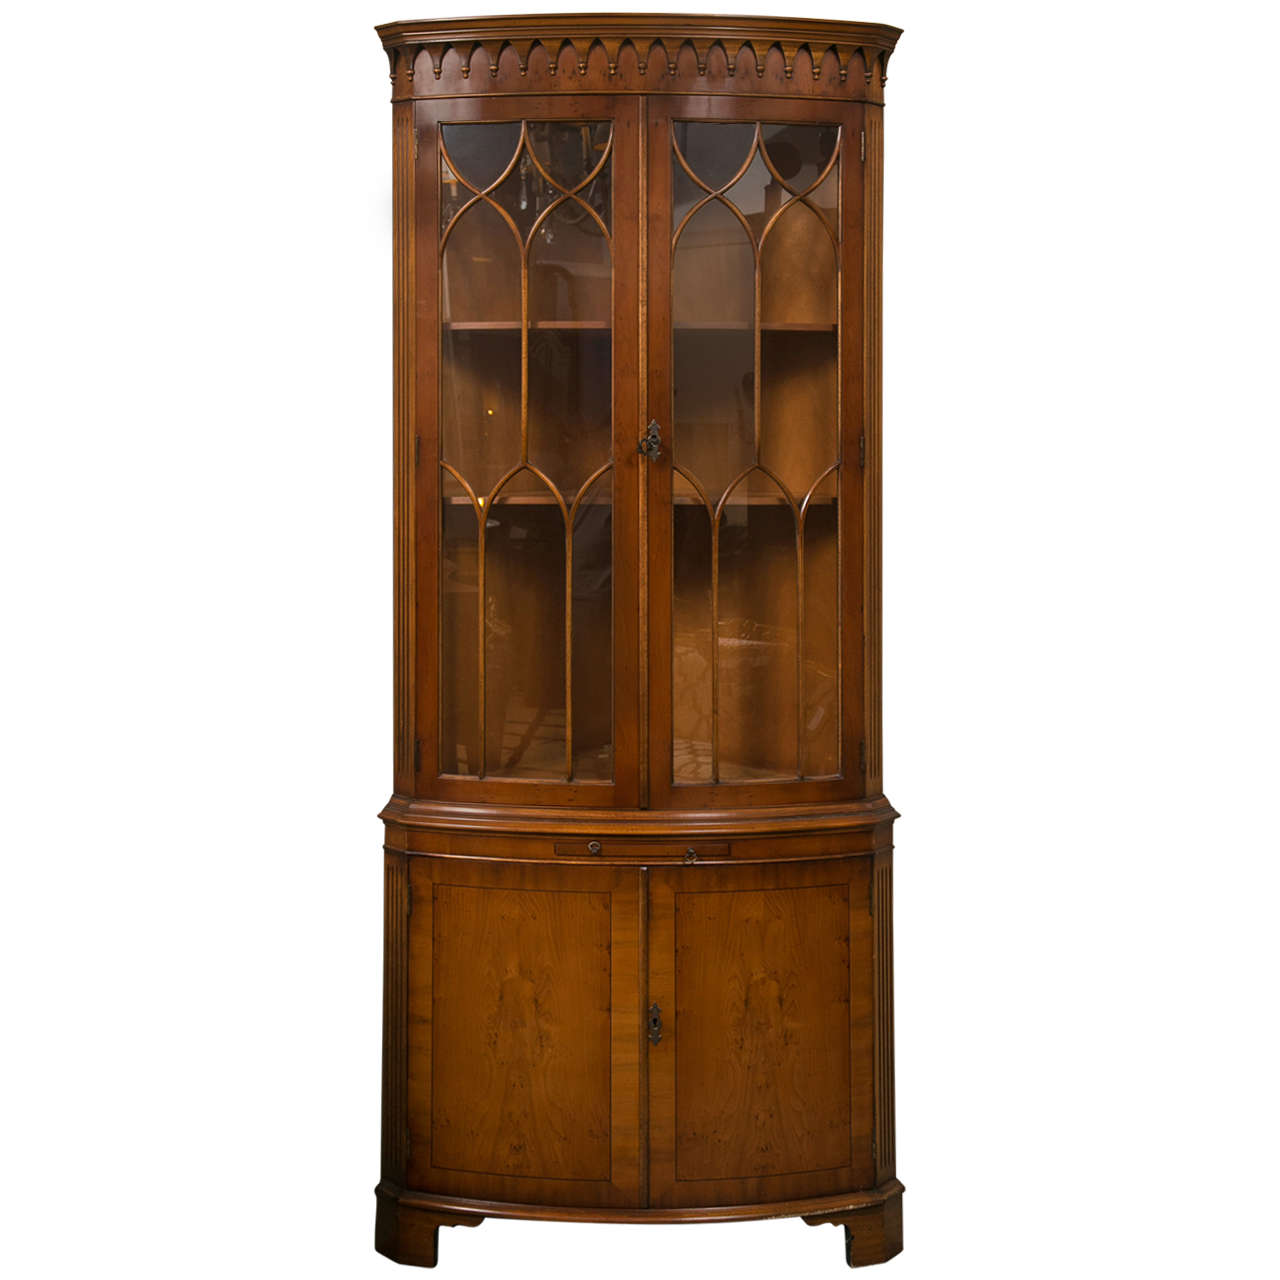 Bevan Funnell Yew Wood Corner Cabinet at 1stdibs